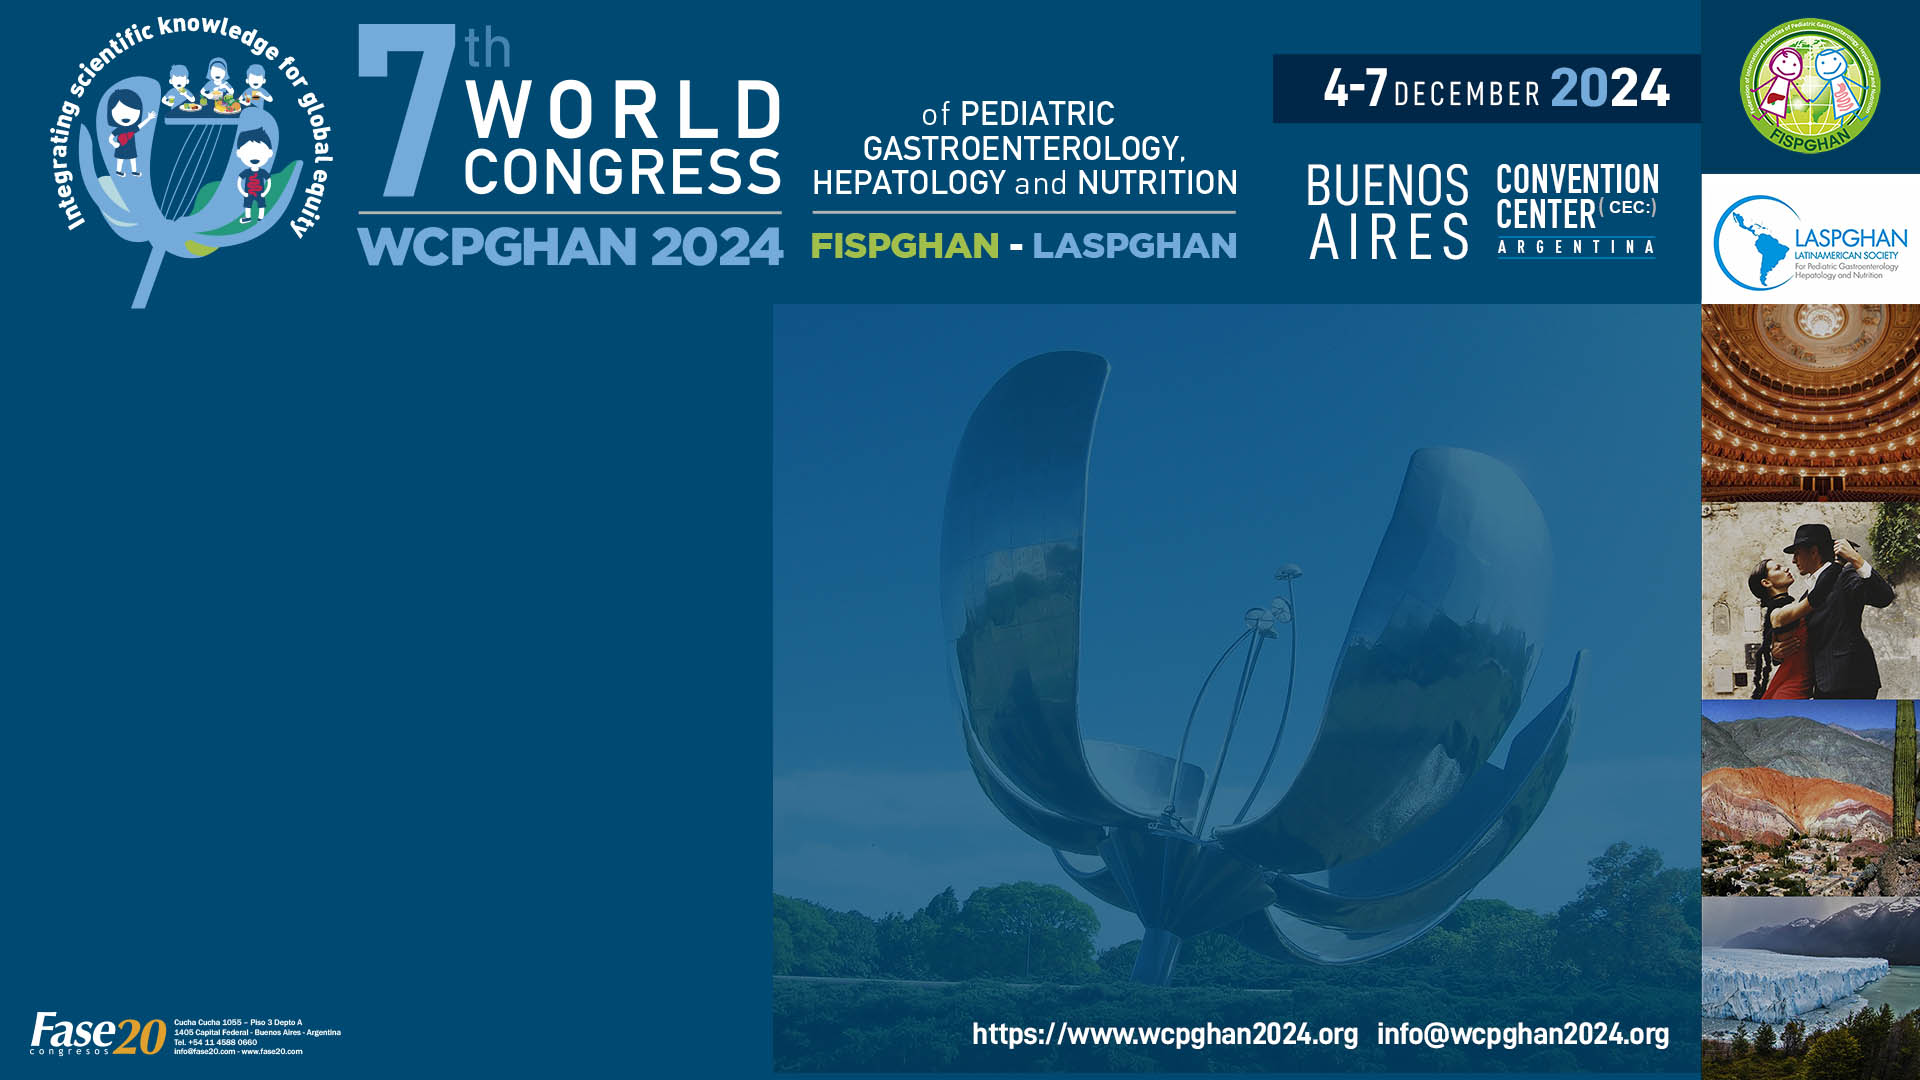 7th World Congress of Pedriatric Gastroenterology, Hepatology and Nutrition